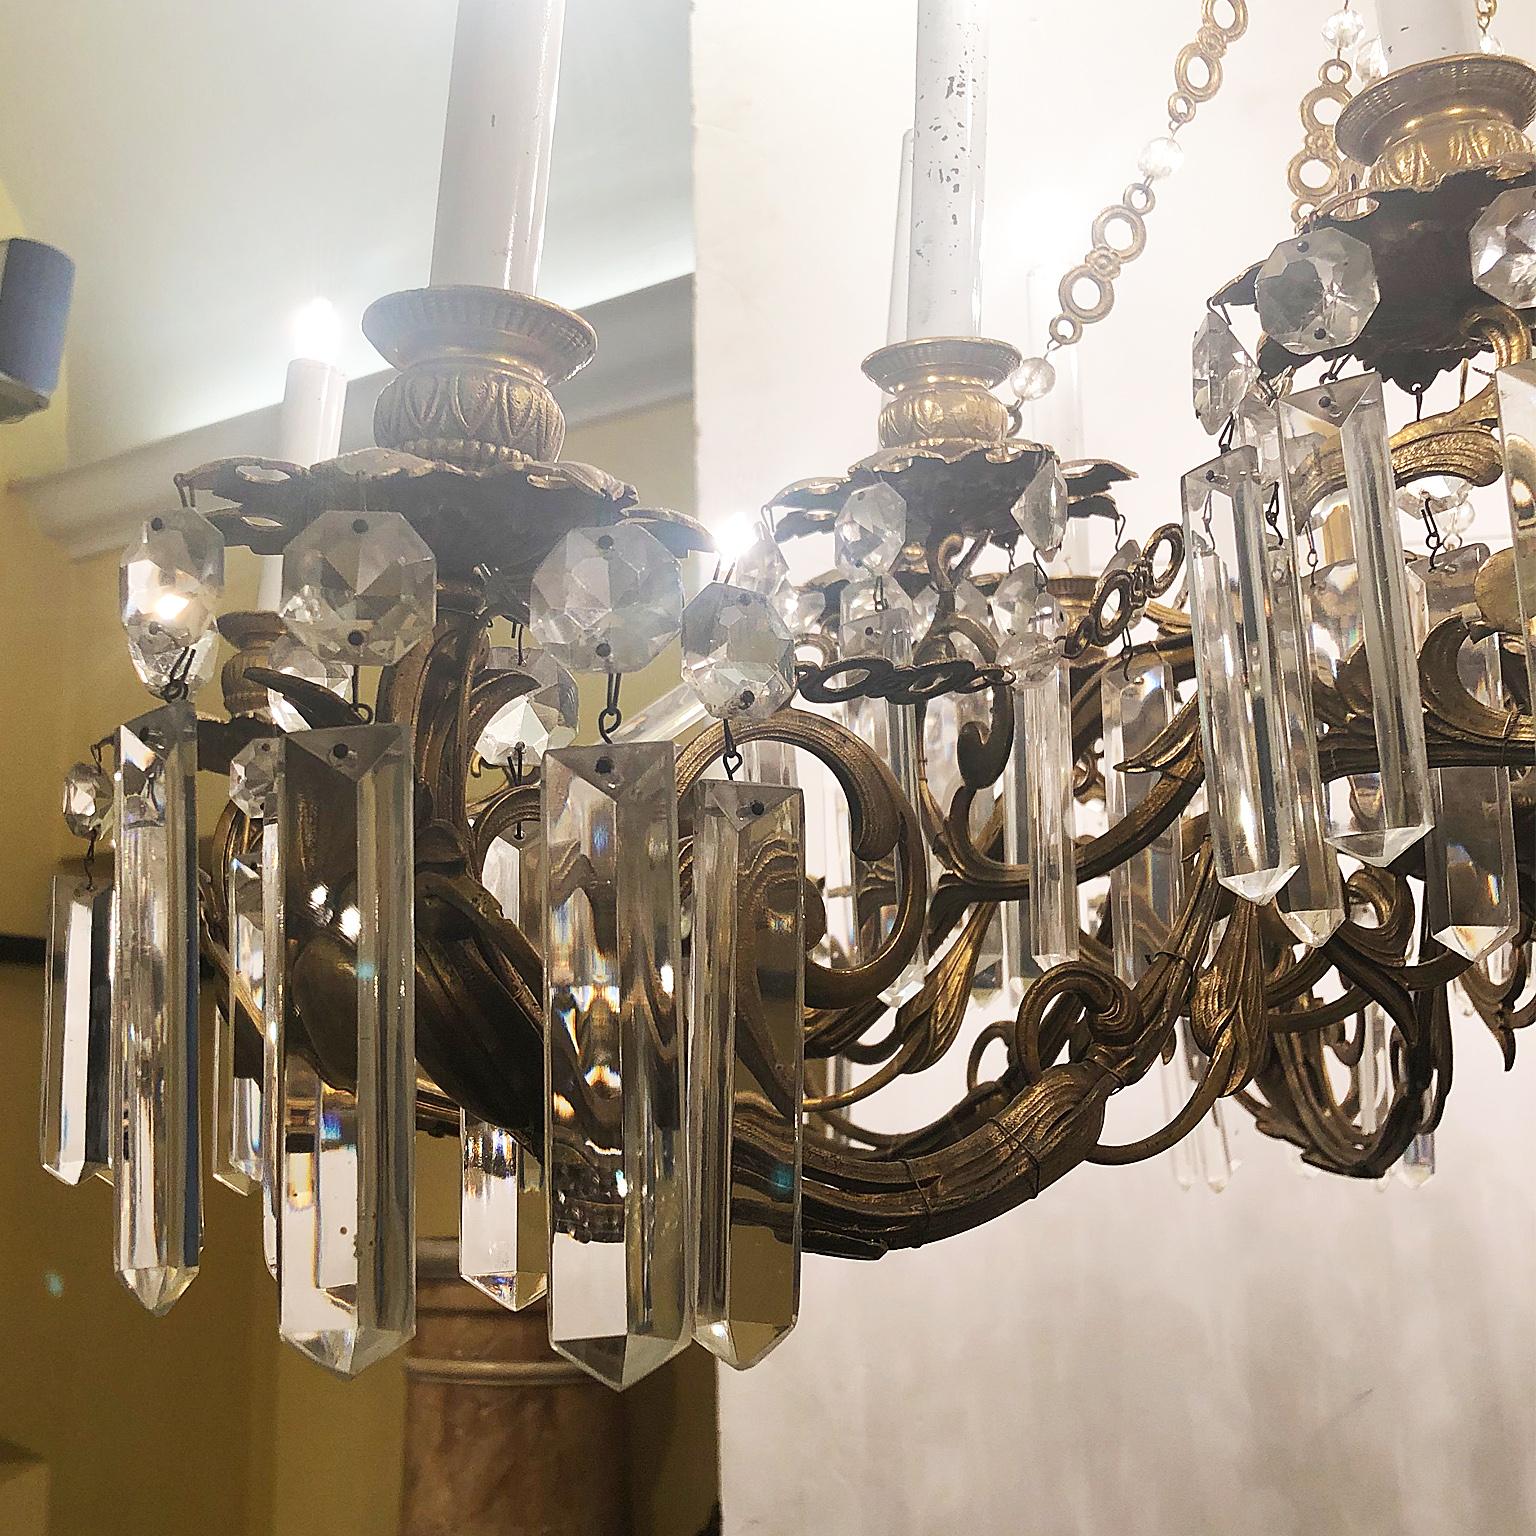 Mid-19th Century Italian Florence Capital Big Chandelier Gilded Bronze Cristall Pendent 16-Light For Sale